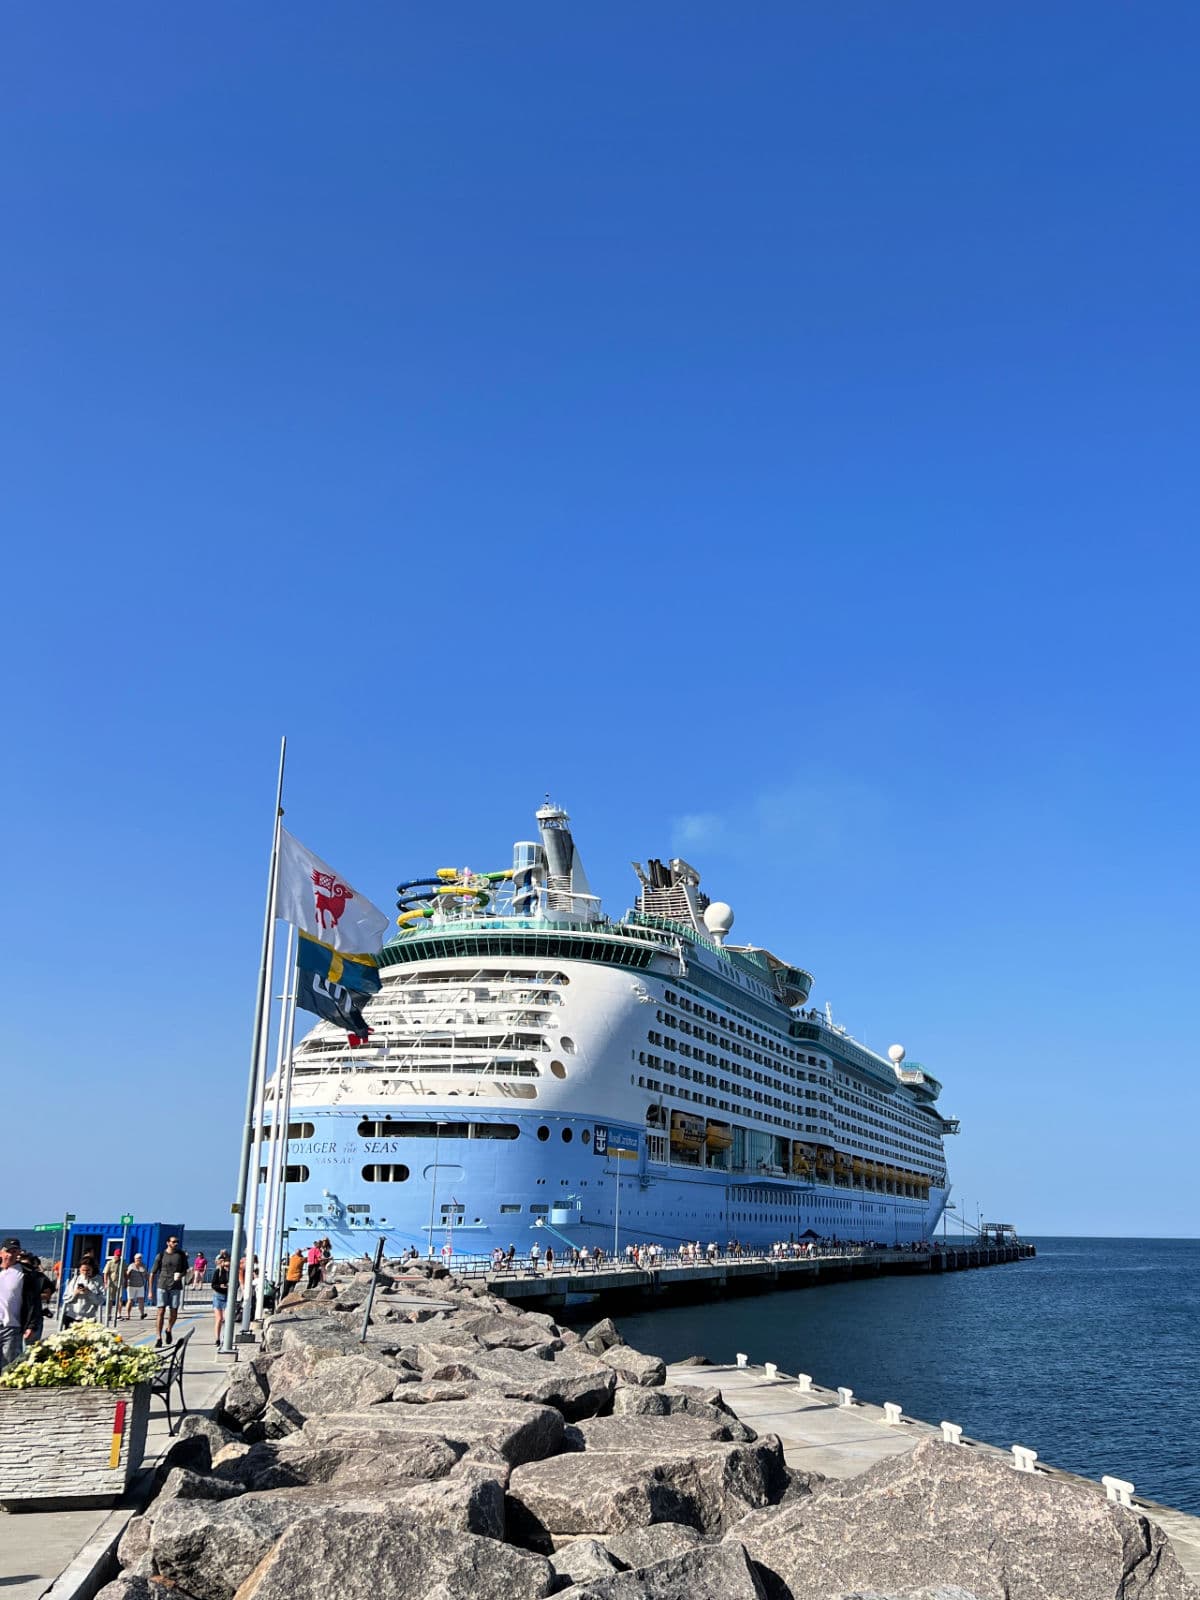 A large cruise ship docked at a dock.